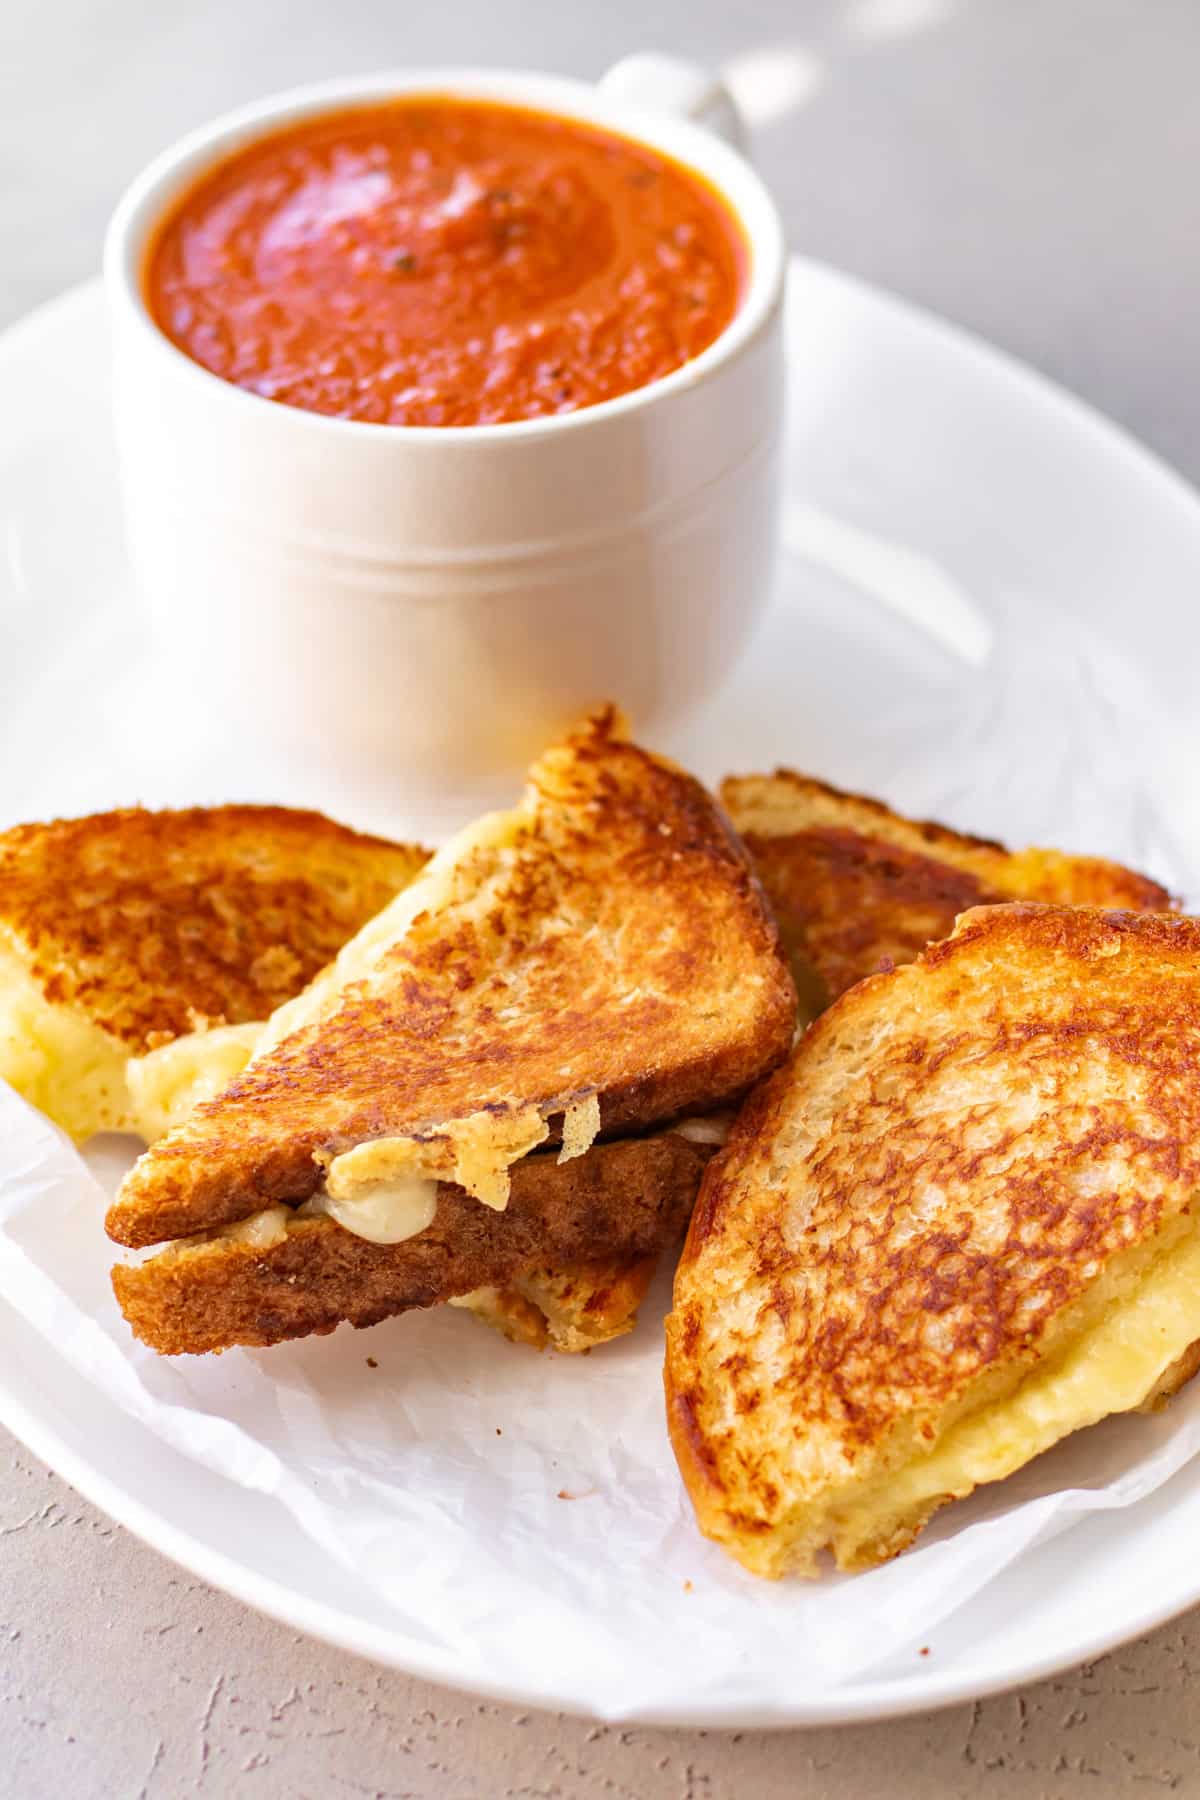 grilled cheese sandwiches on a plate with a mug of tomato soup.